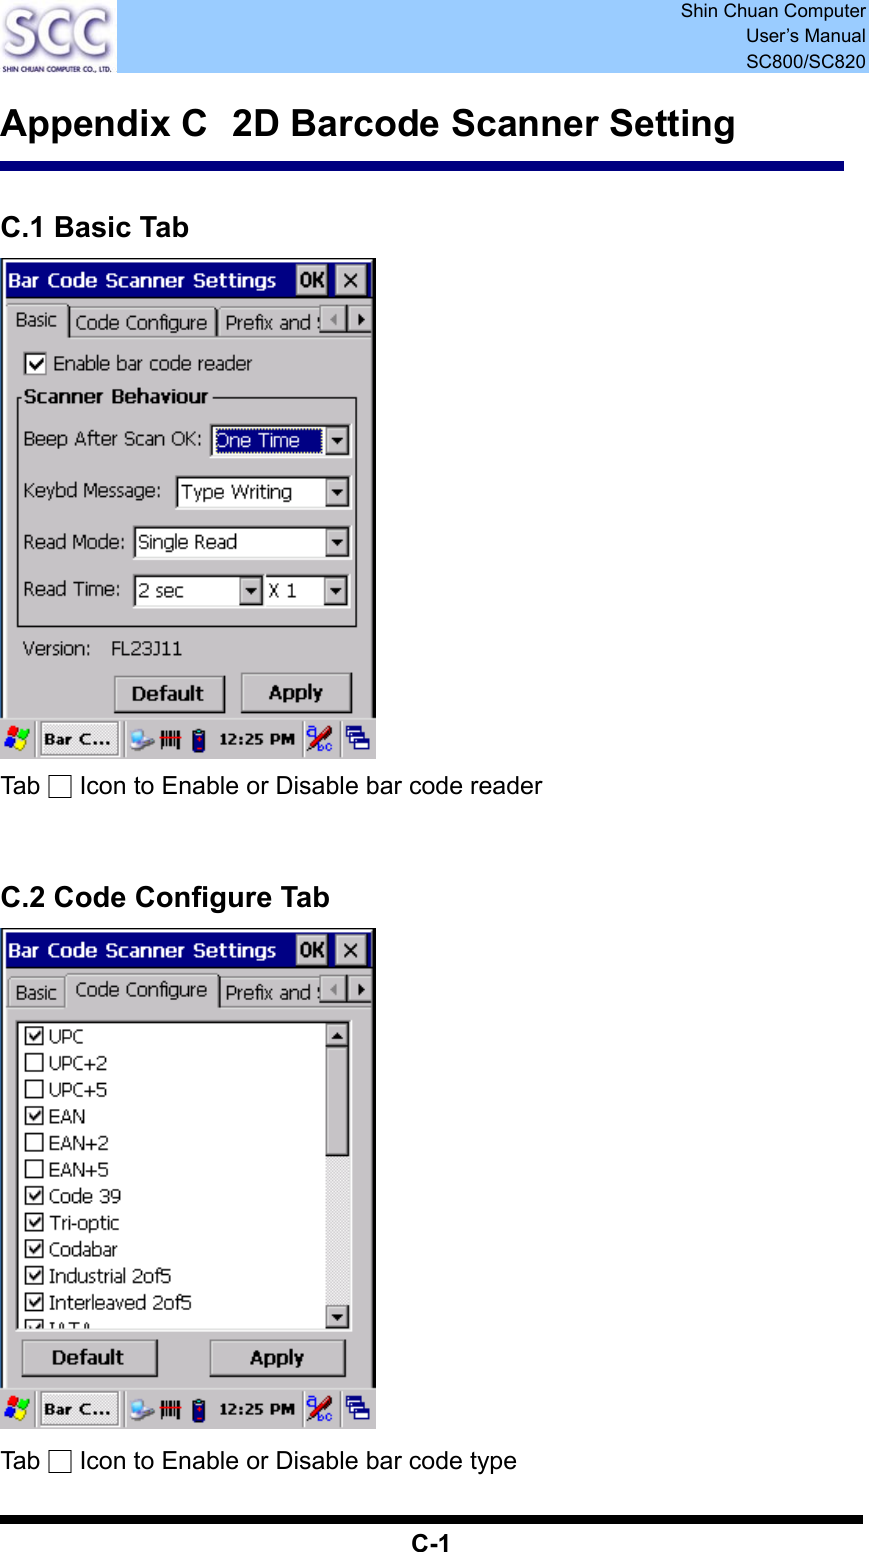  Shin Chuan Computer User’s Manual SC800/SC820  C-1 Appendix C   2D Barcode Scanner Setting   C.1 Basic Tab  Tab □ Icon to Enable or Disable bar code reader   C.2 Code Configure Tab  Tab □ Icon to Enable or Disable bar code type 